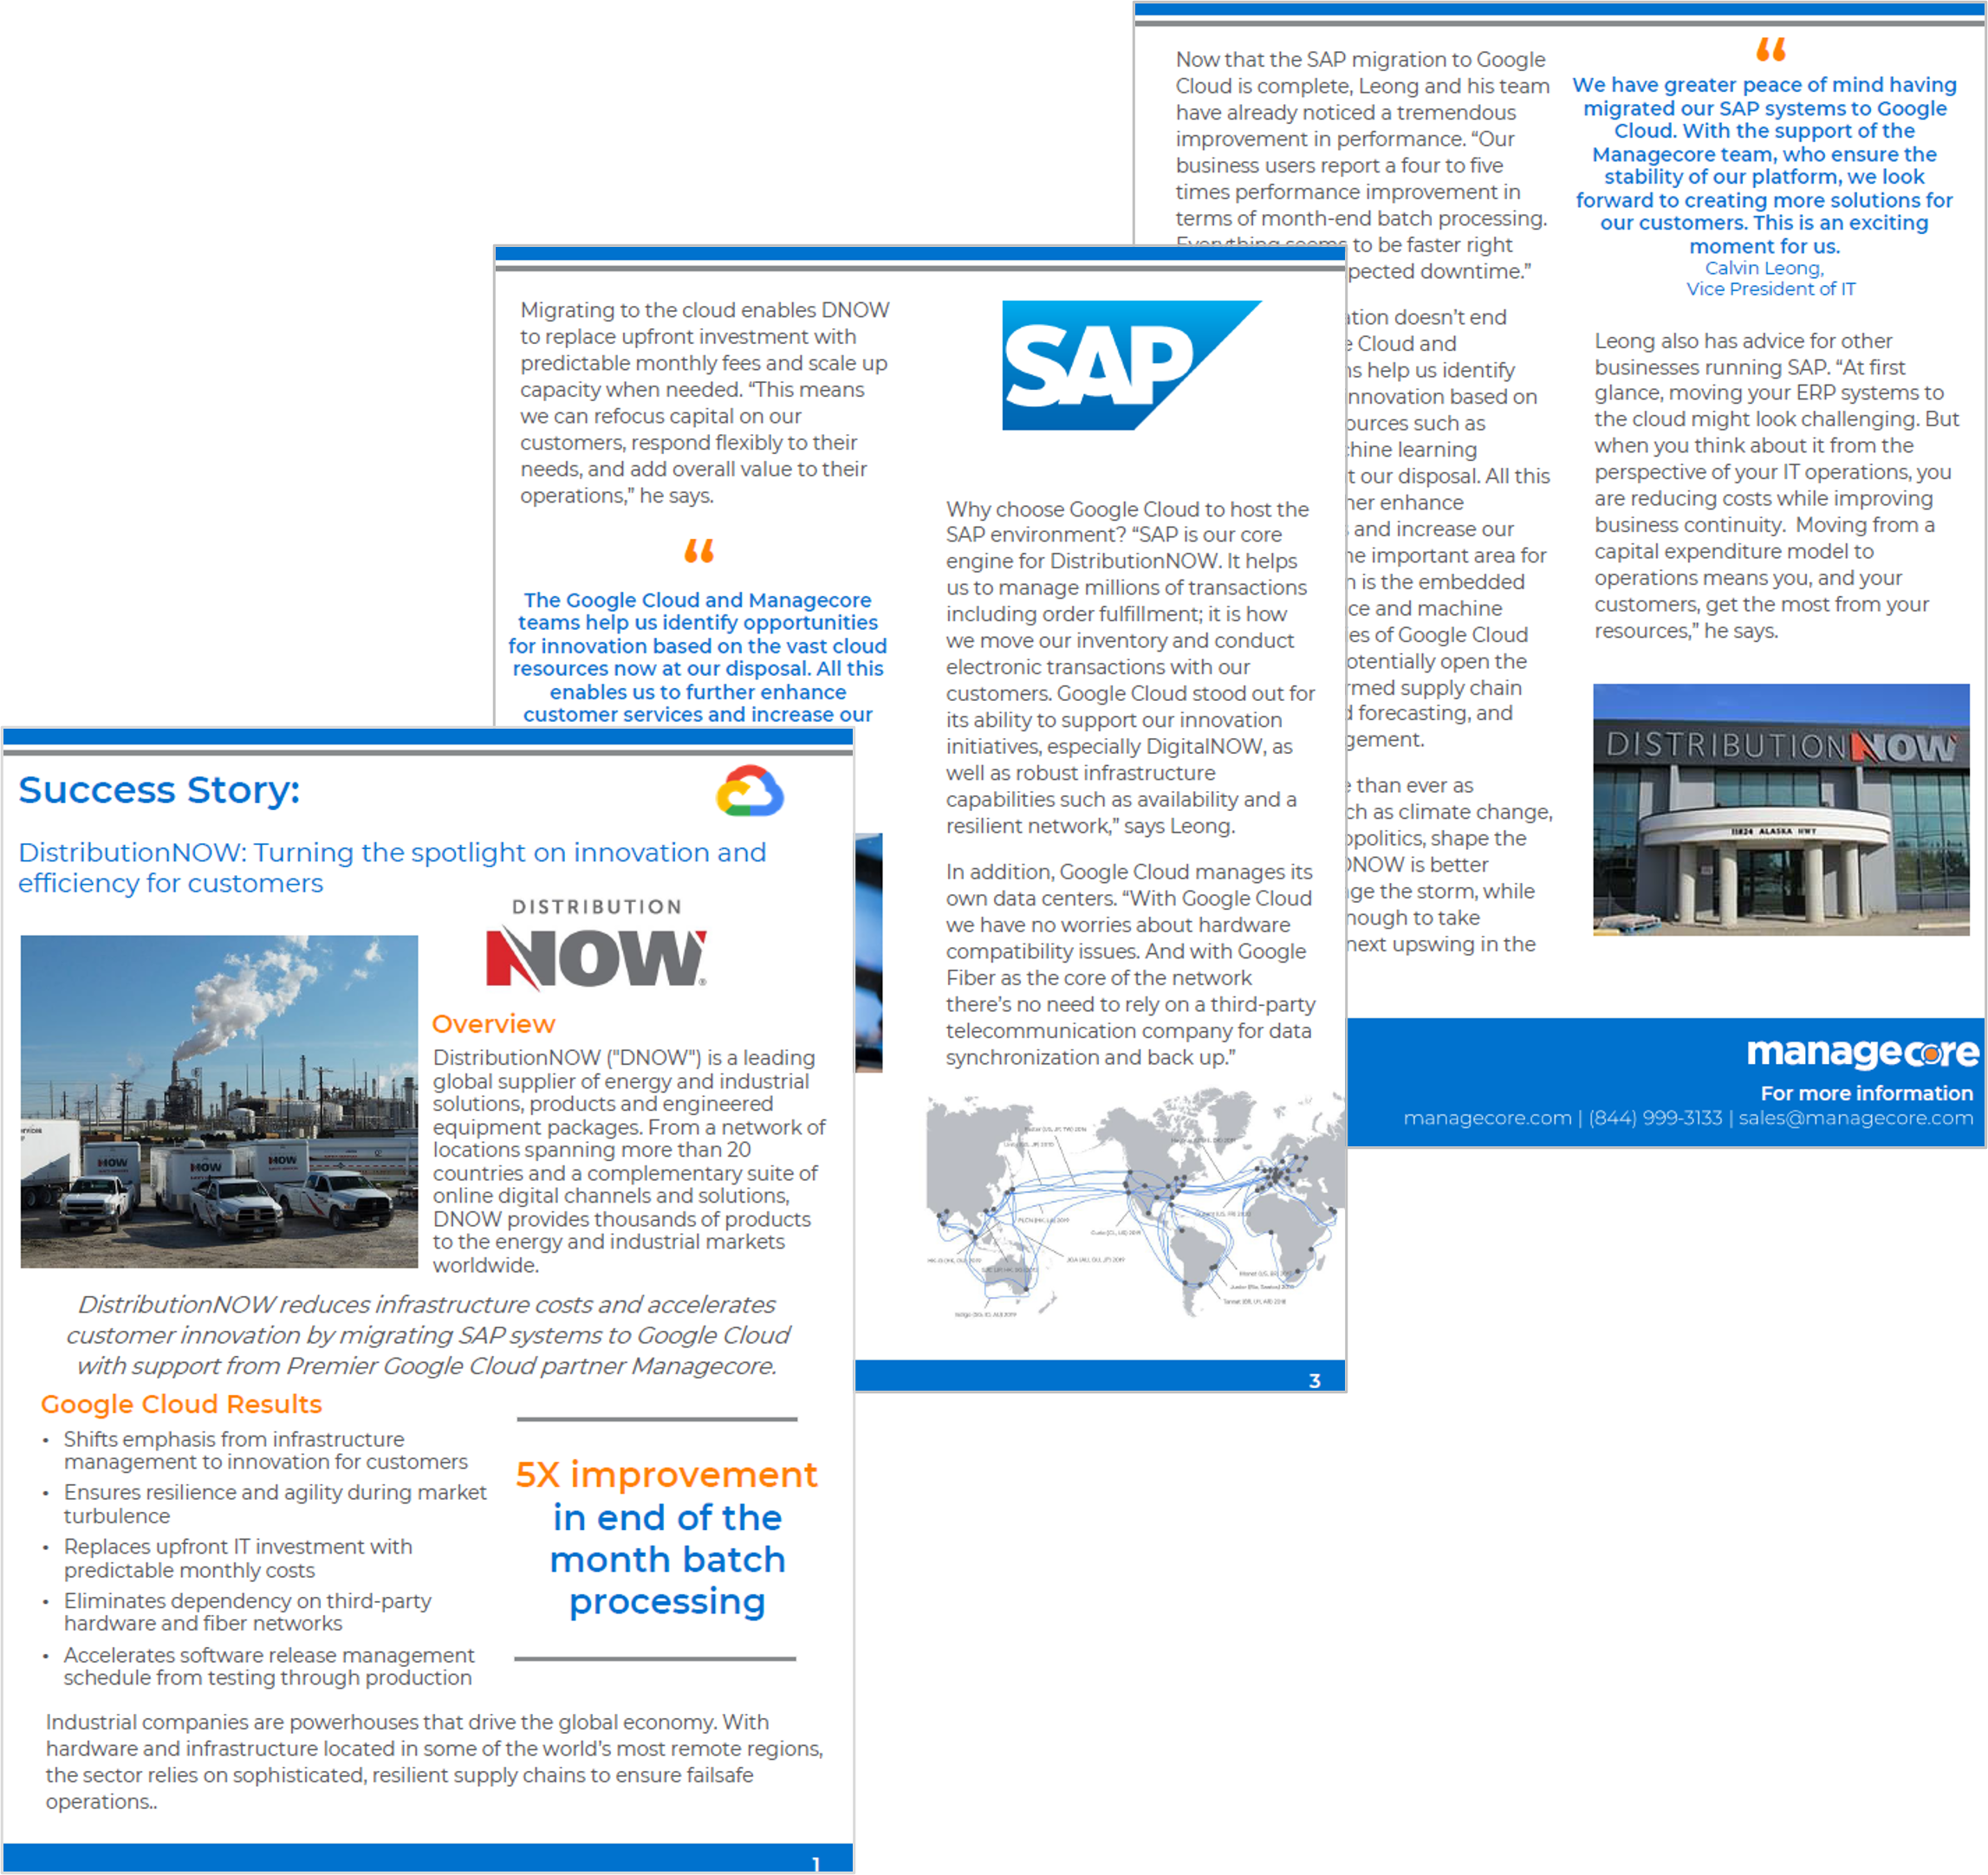 Managecore Customer DNOW Success Story: Turning the spotlight on innovation and efficiency for customers by running SAP on Google Cloud